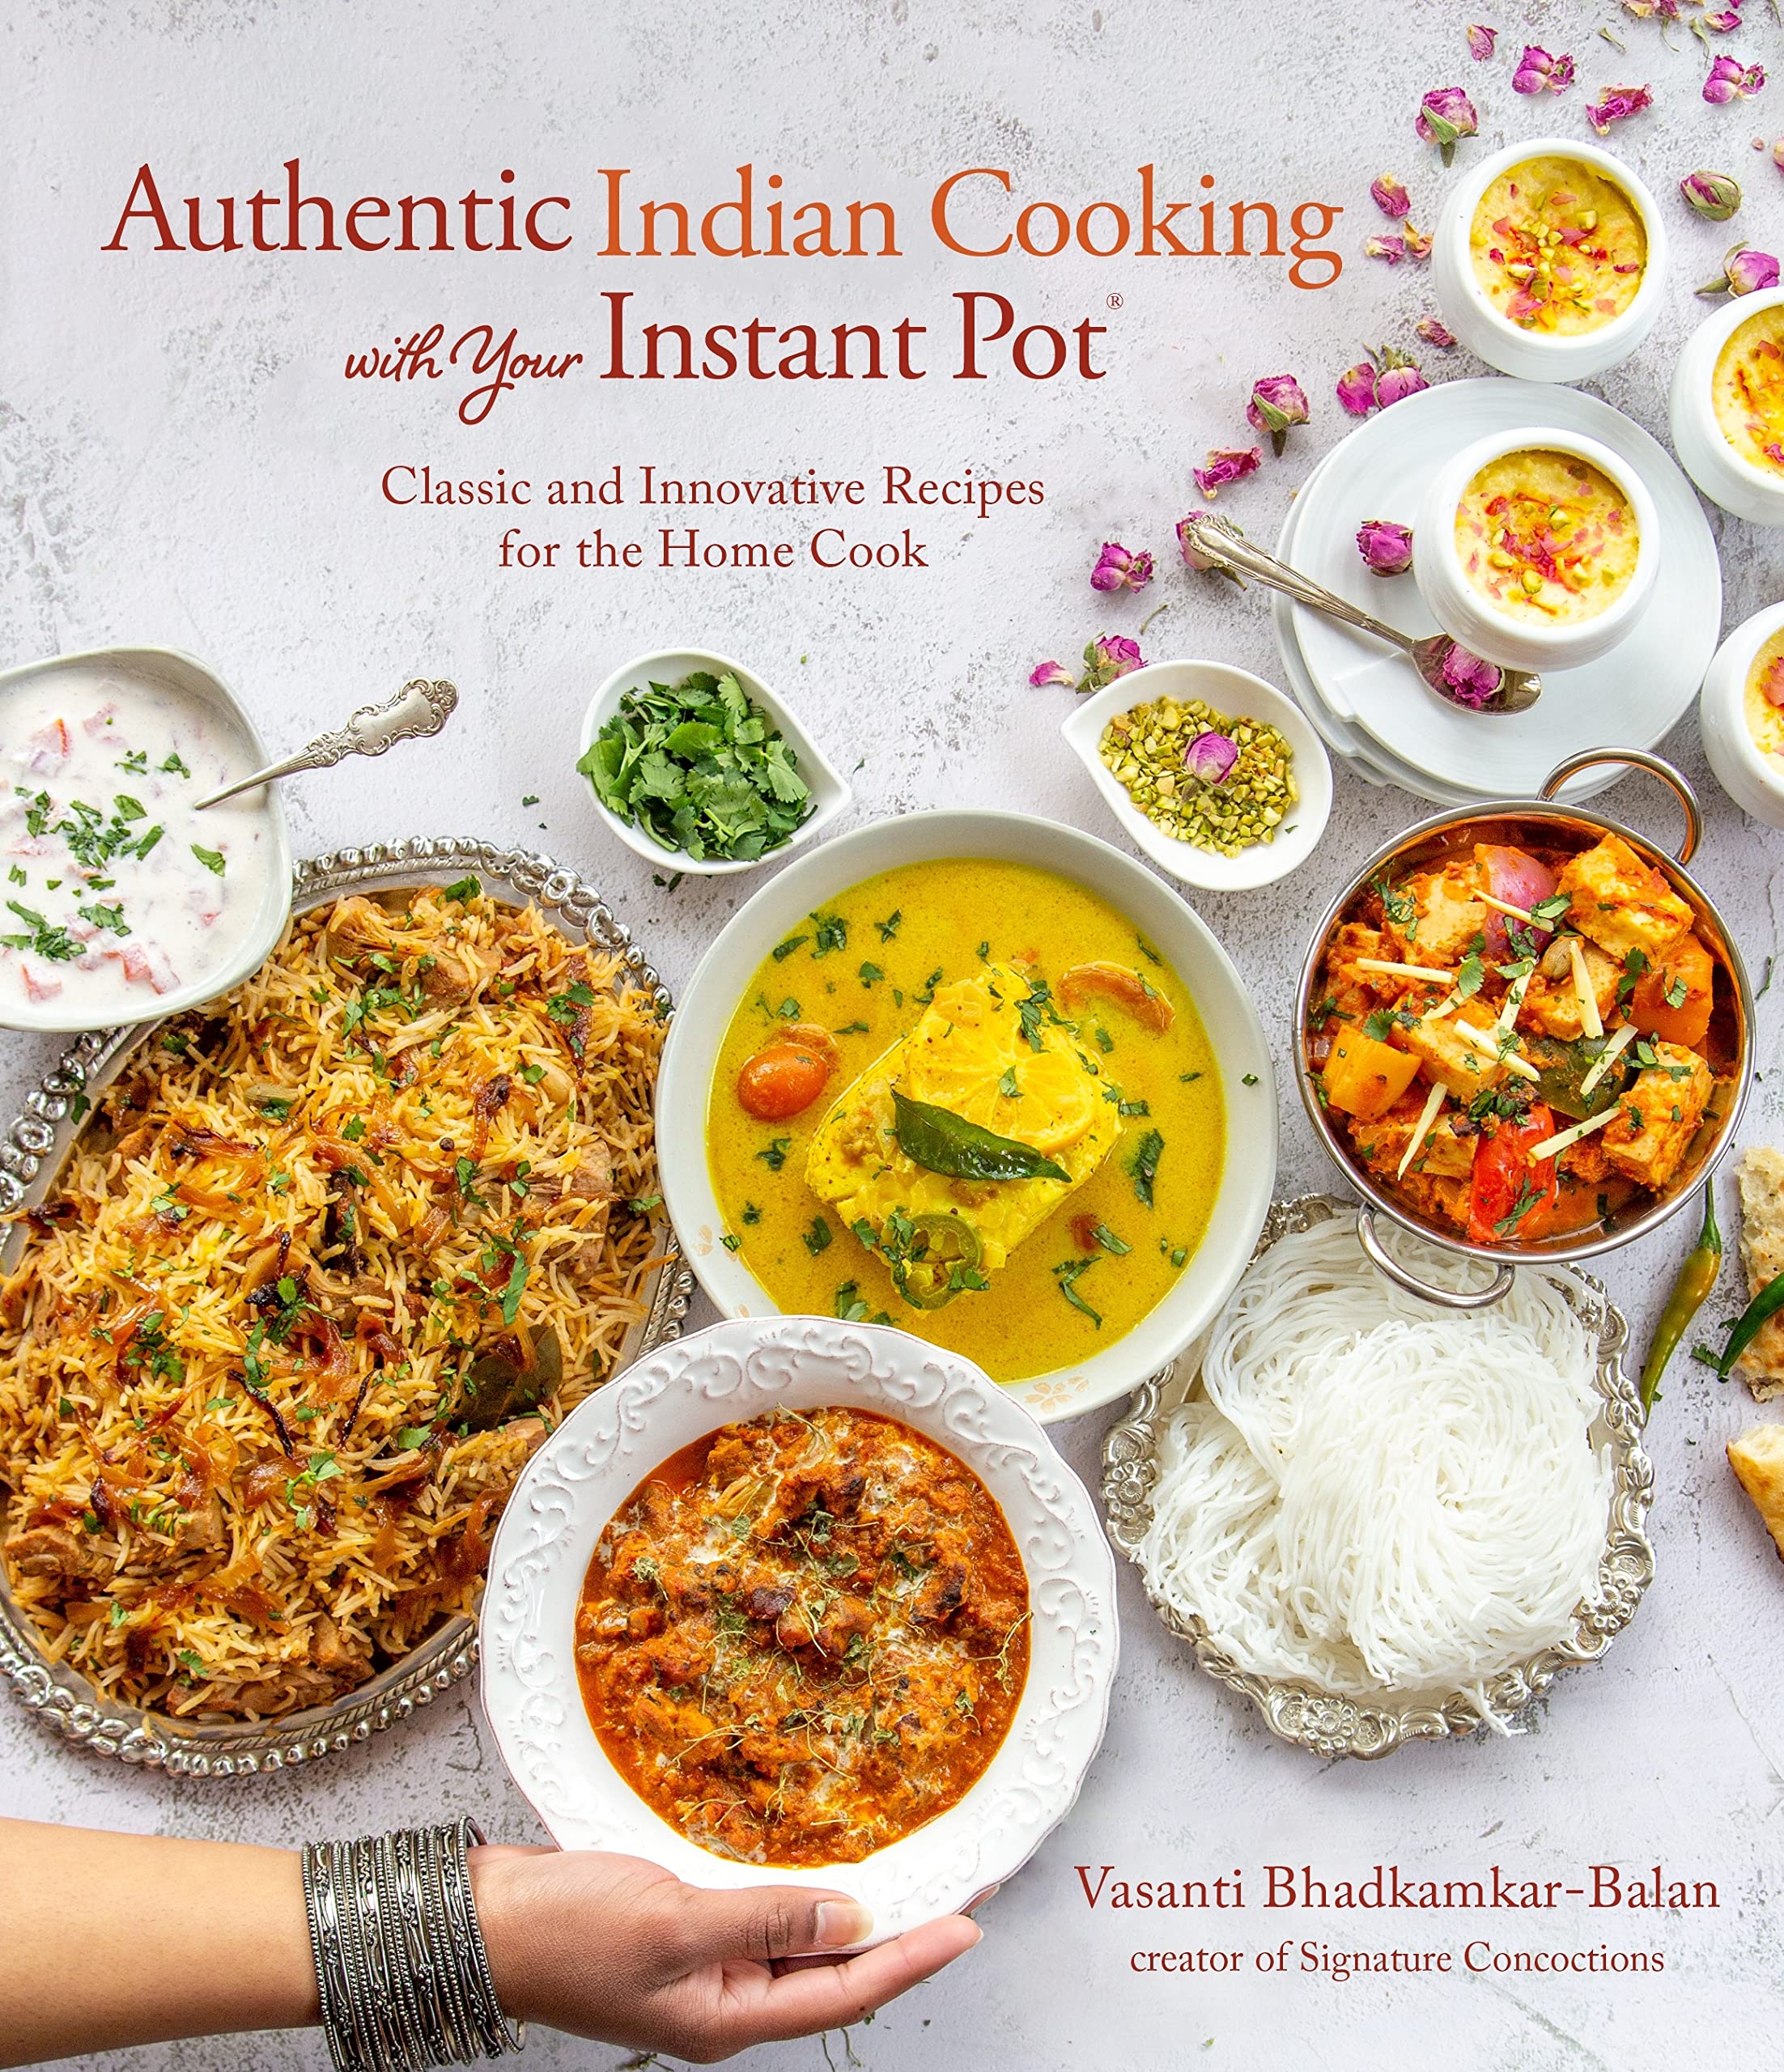 Authentic Indian Cooking with Your Instant Pot: Classic and Innovative Recipes for the Home Cook (Vasanti Bhadkamkar-Balan) *Signed*